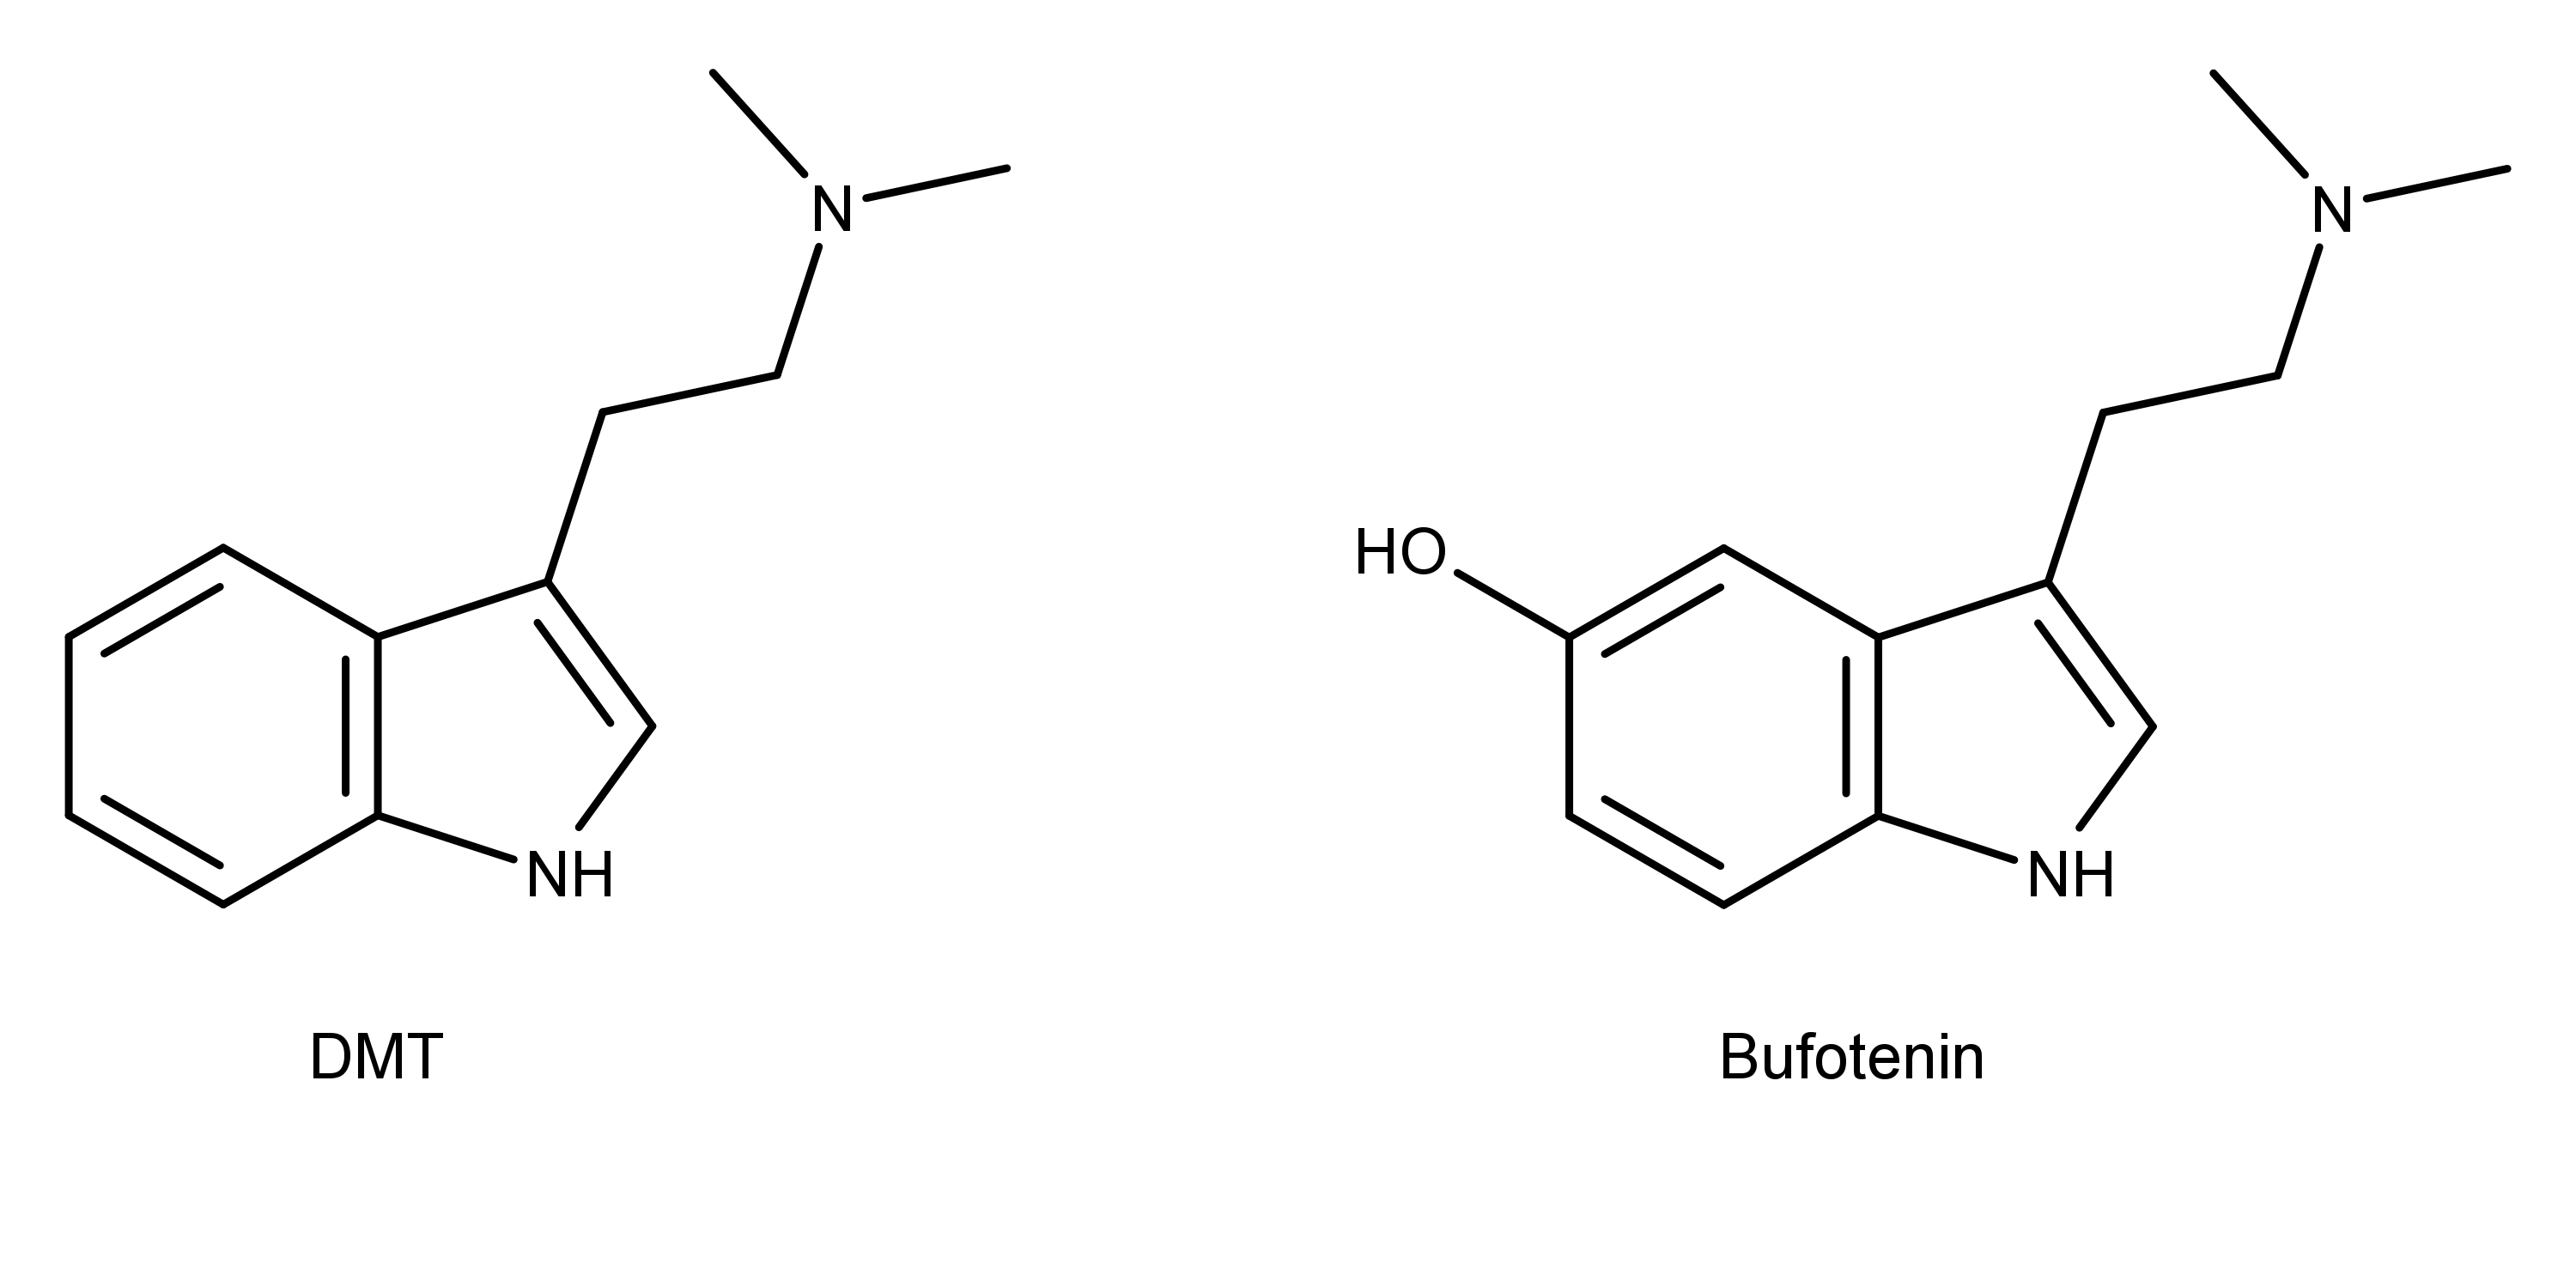 The chemical structures of DMT and bufotenin.